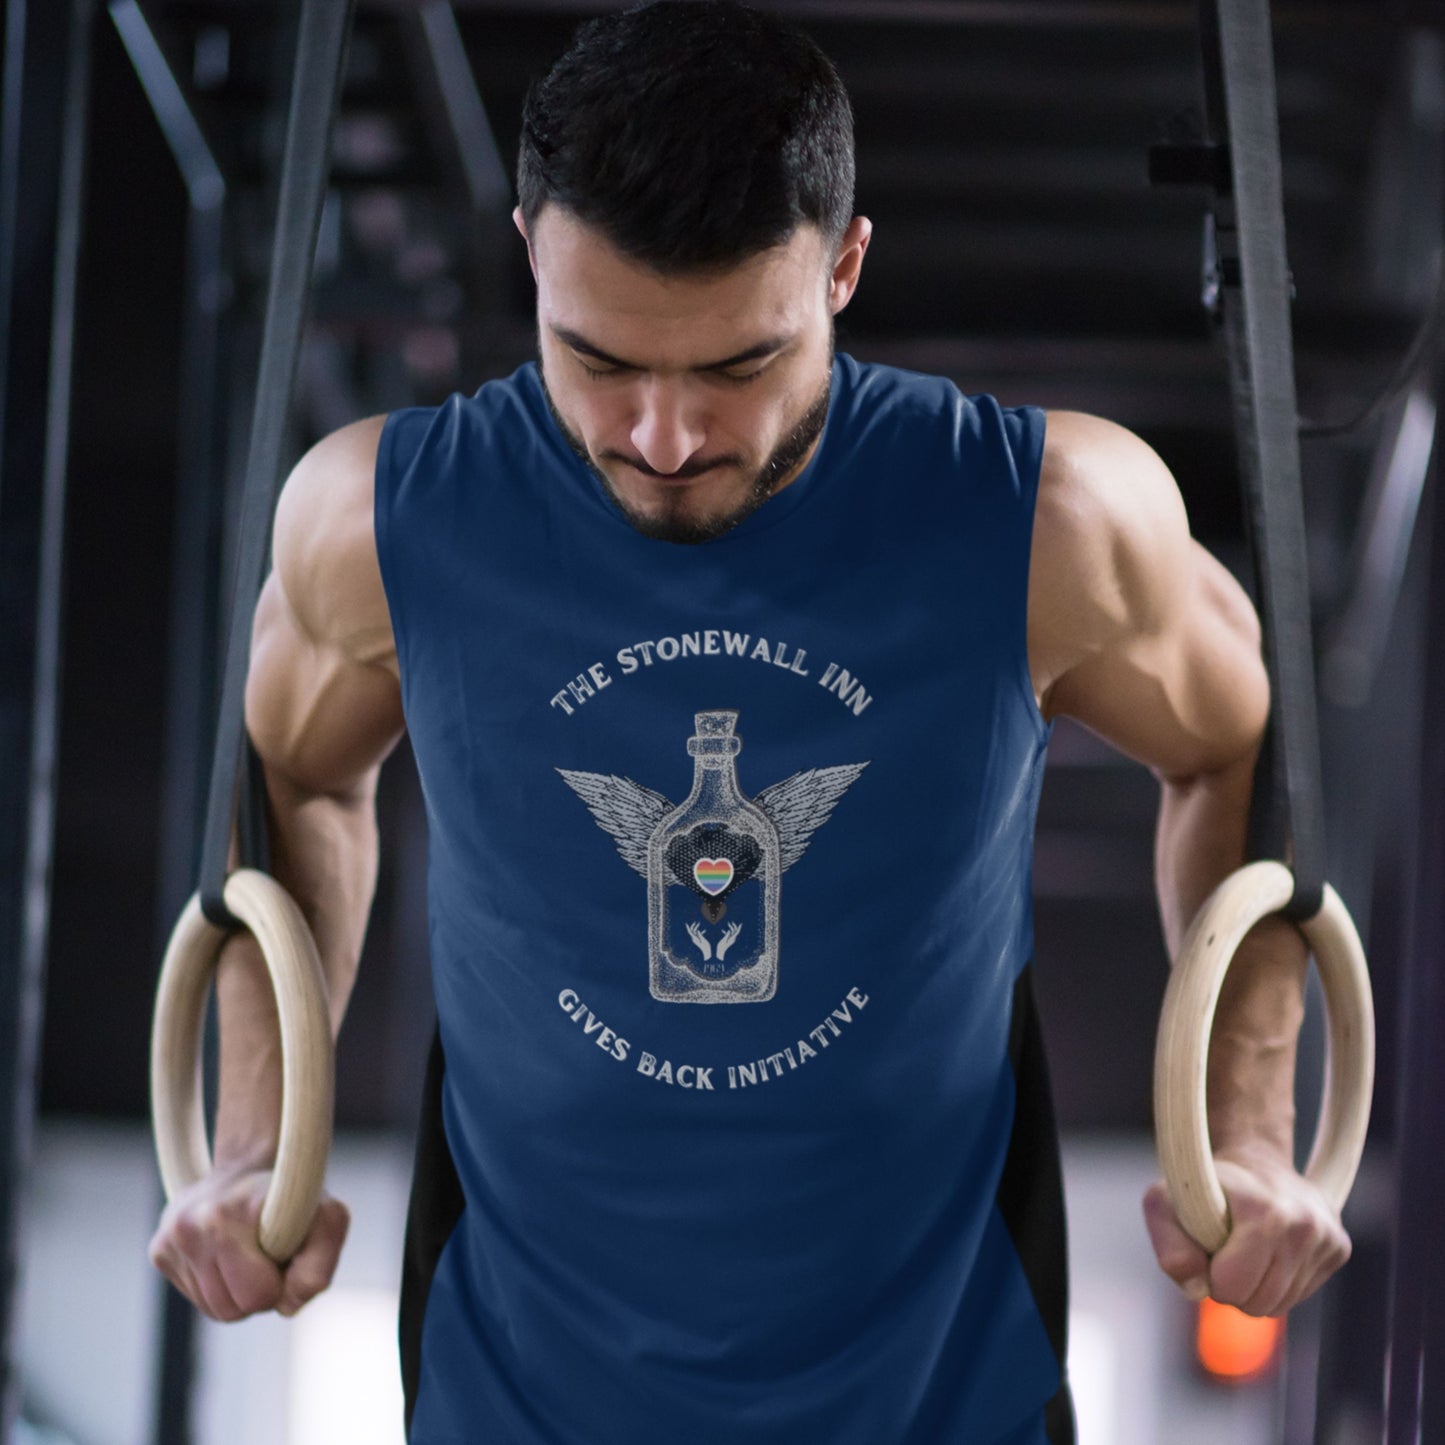 The Stonewall Inn Gives Back Initiative Tattoo Wings Muscle Tank in Blue